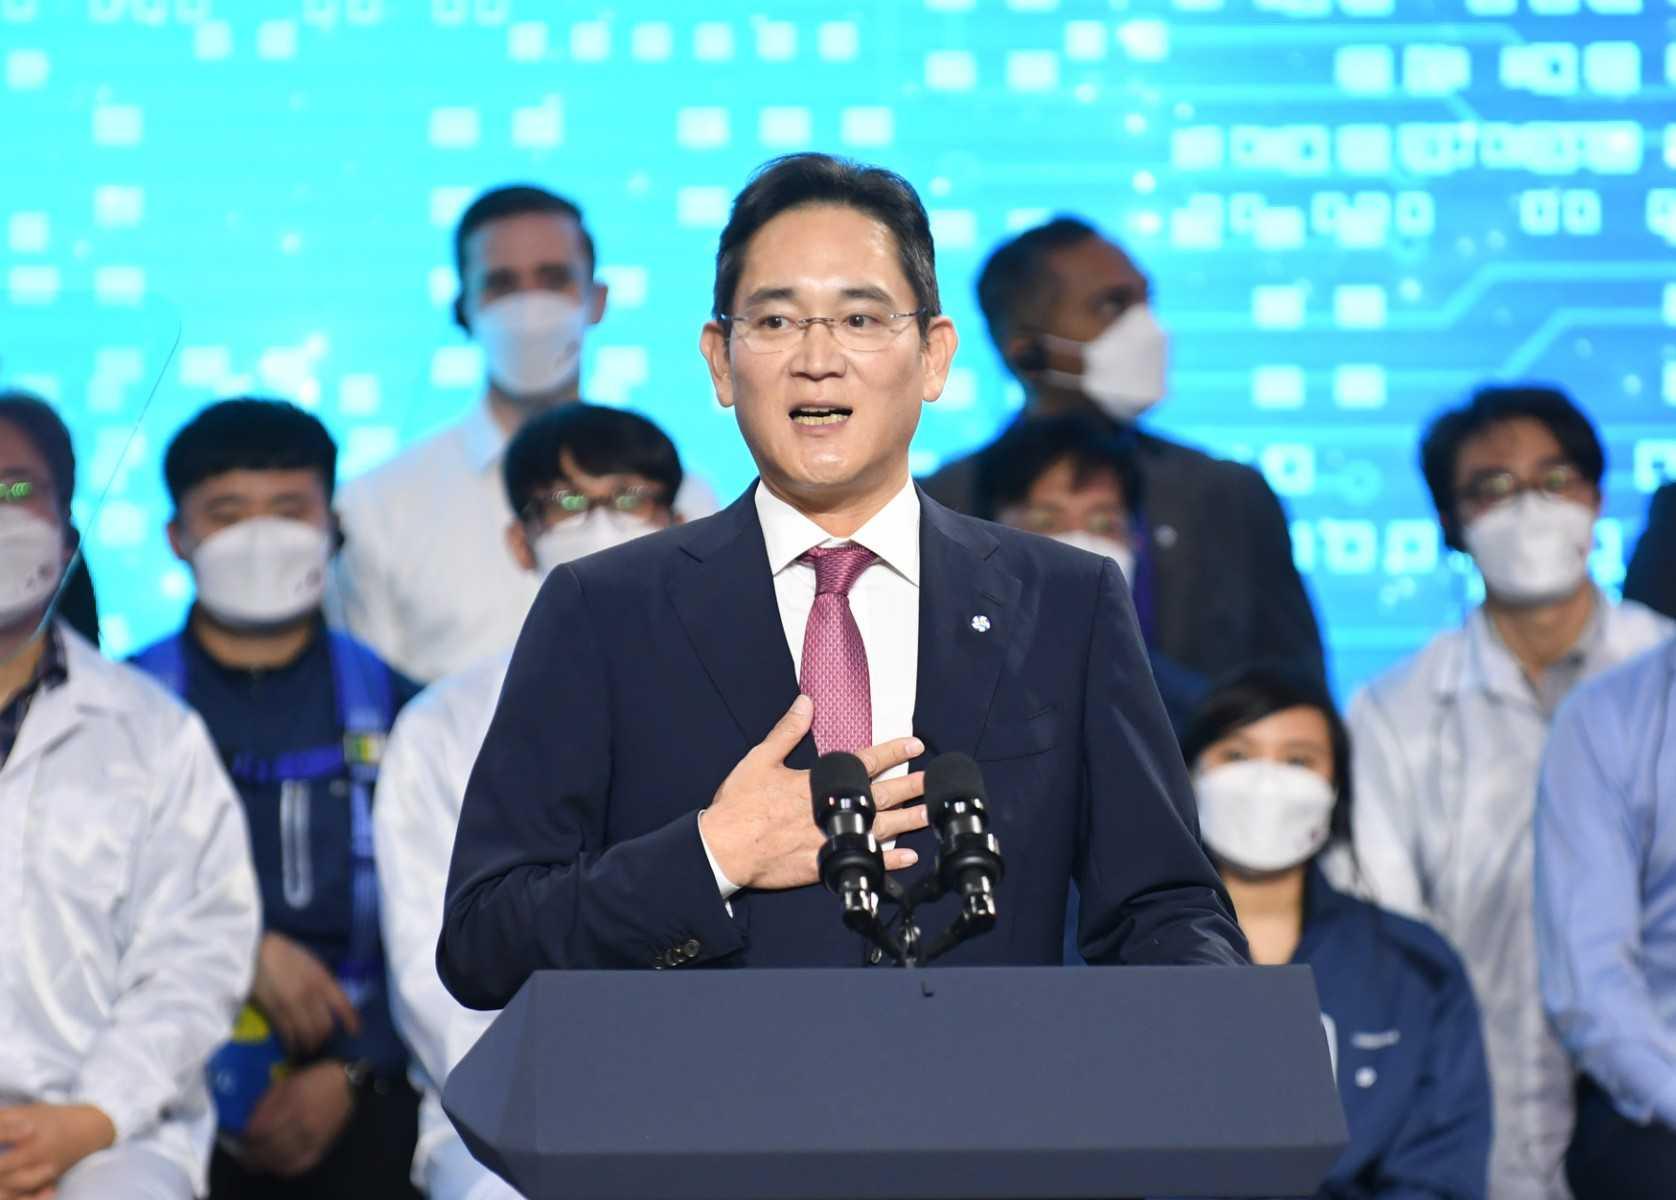 Samsung Electronics Co Vice Chairman Lee Jay Yong speaks during a press conference after a visit to the Samsung Electronic Pyeongtaek Campus in Pyeongtaek on May 20. Photo: AFP 